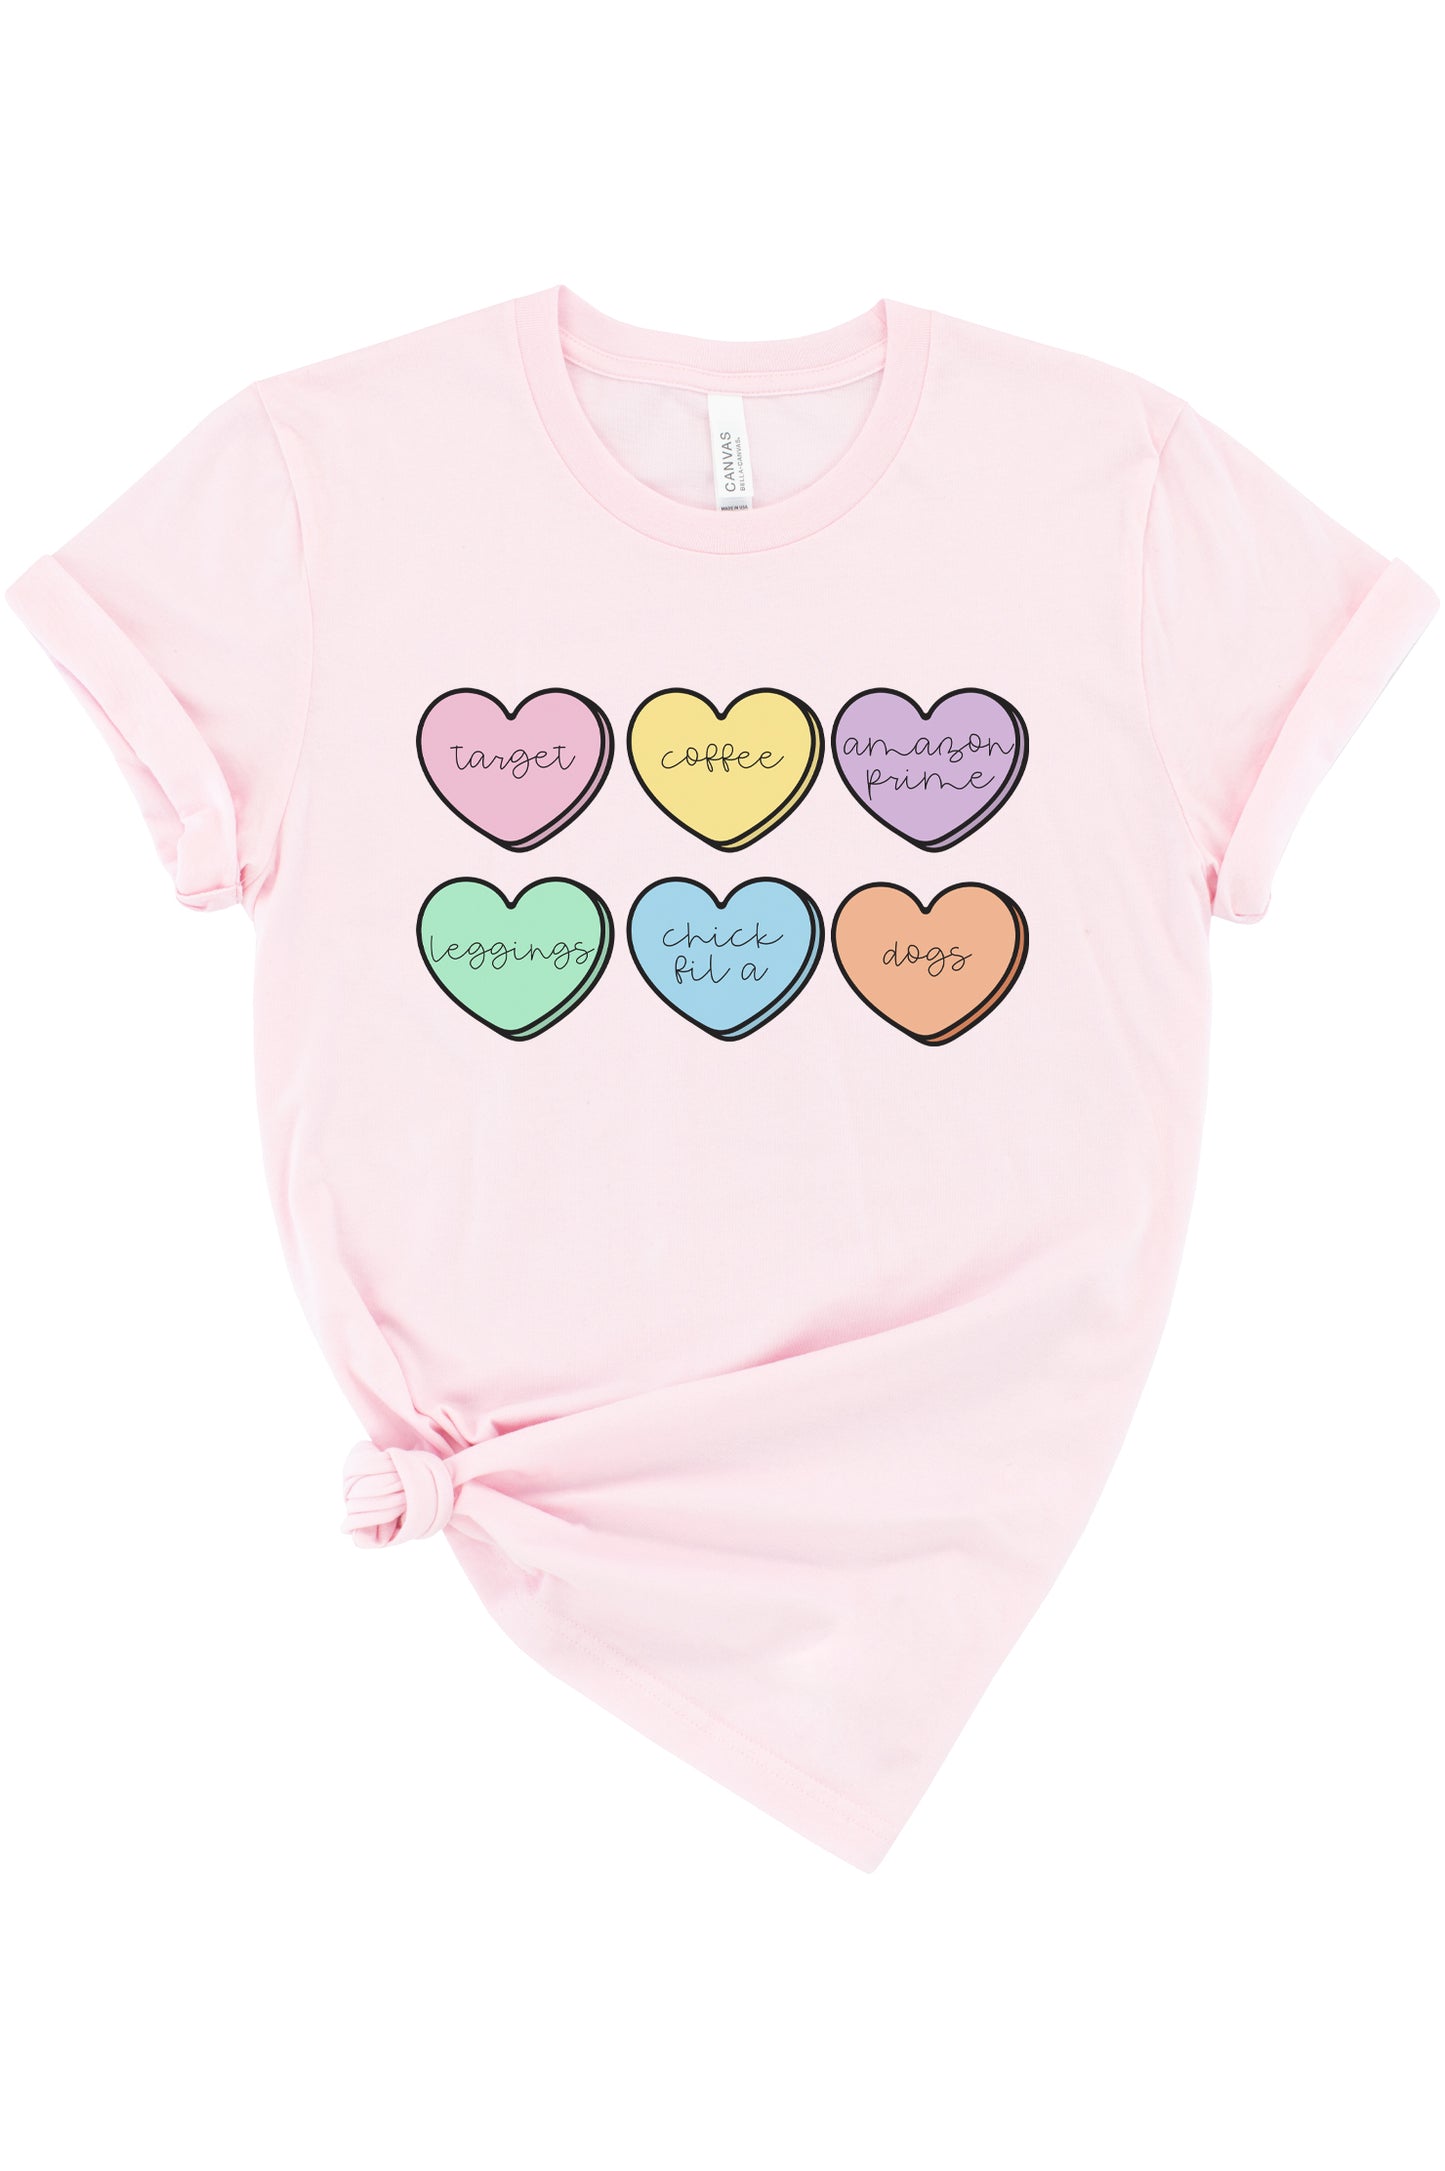 Shopping Conversation Hearts (Dogs) Graphic Tee